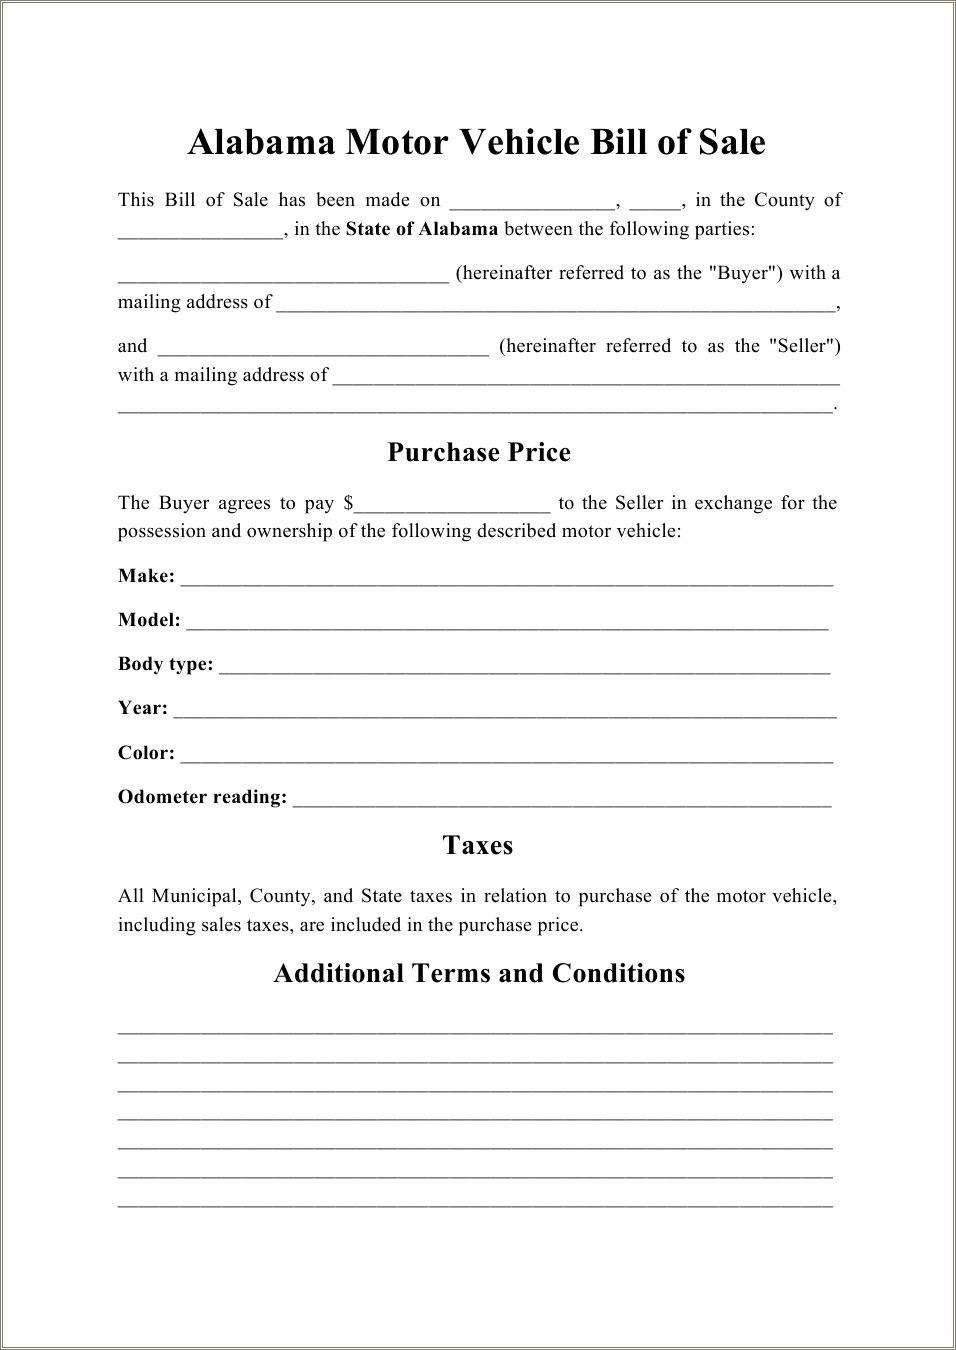 Free Bill Of Sale Alabama Motorcycle Template